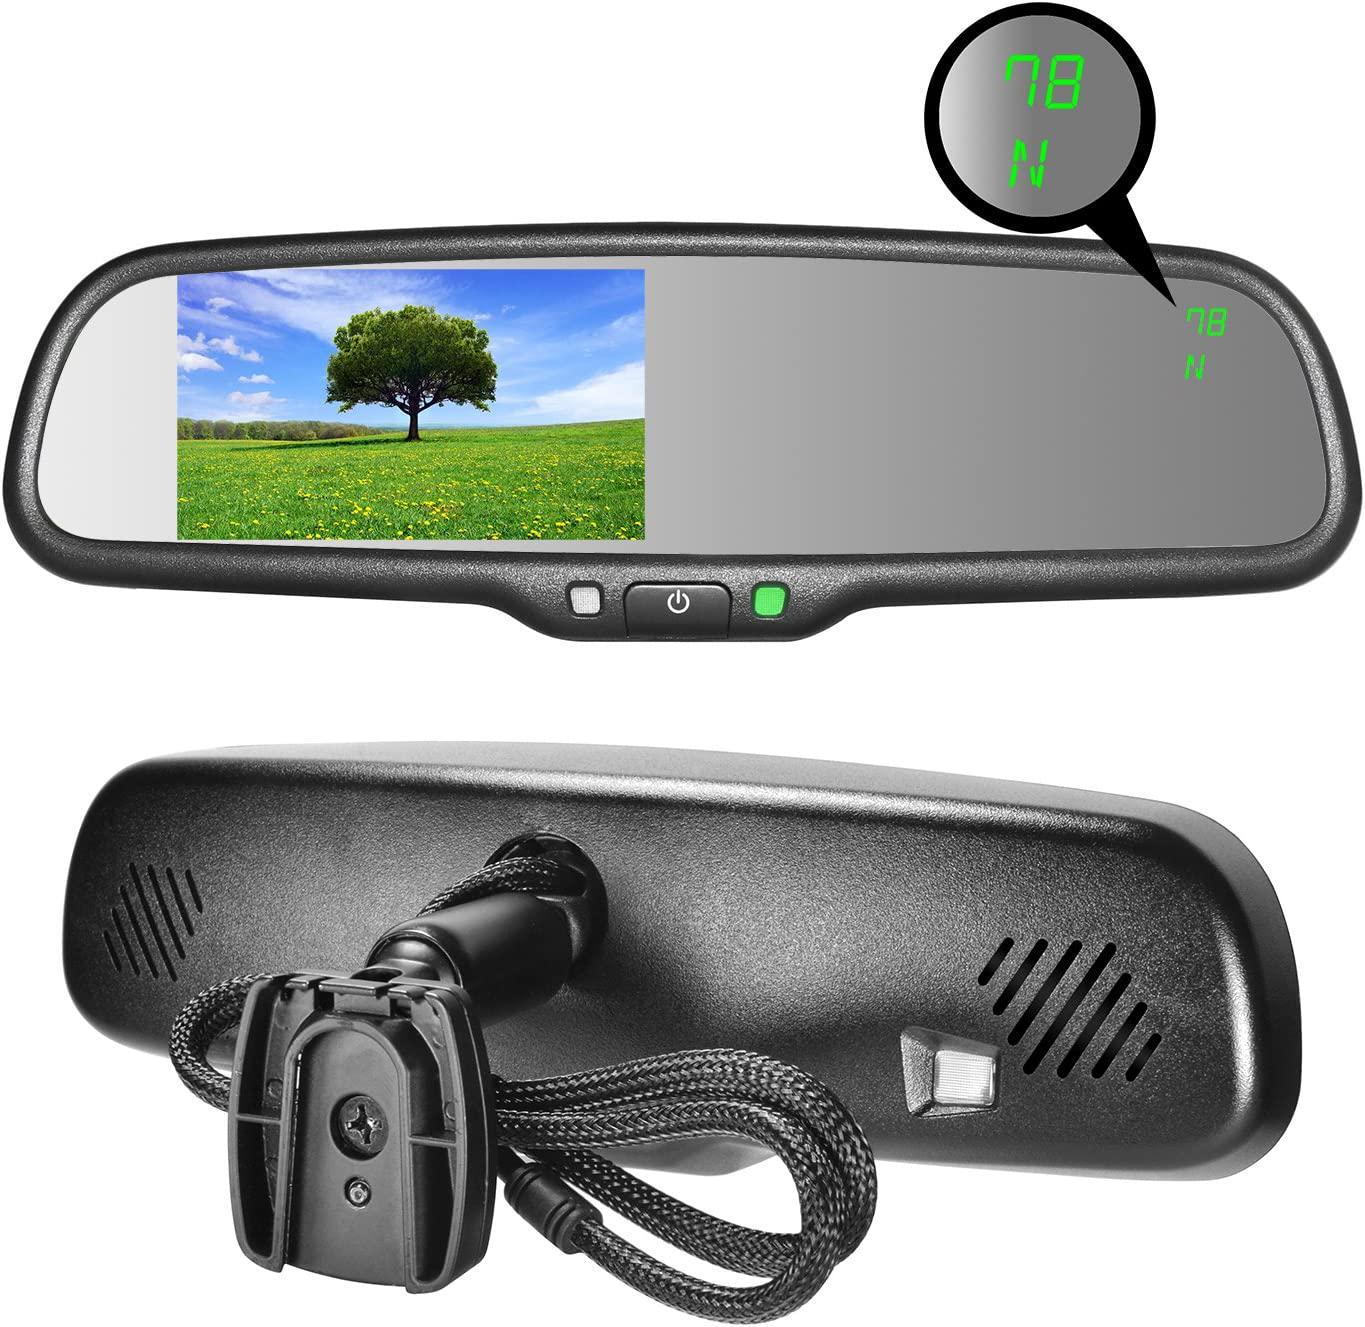 Master Tailgaters, Master Tailgaters OEM Rear View Mirror with 4.3 Auto Adjusting Brightness LCD + Compass and Temperature - Universal Fit